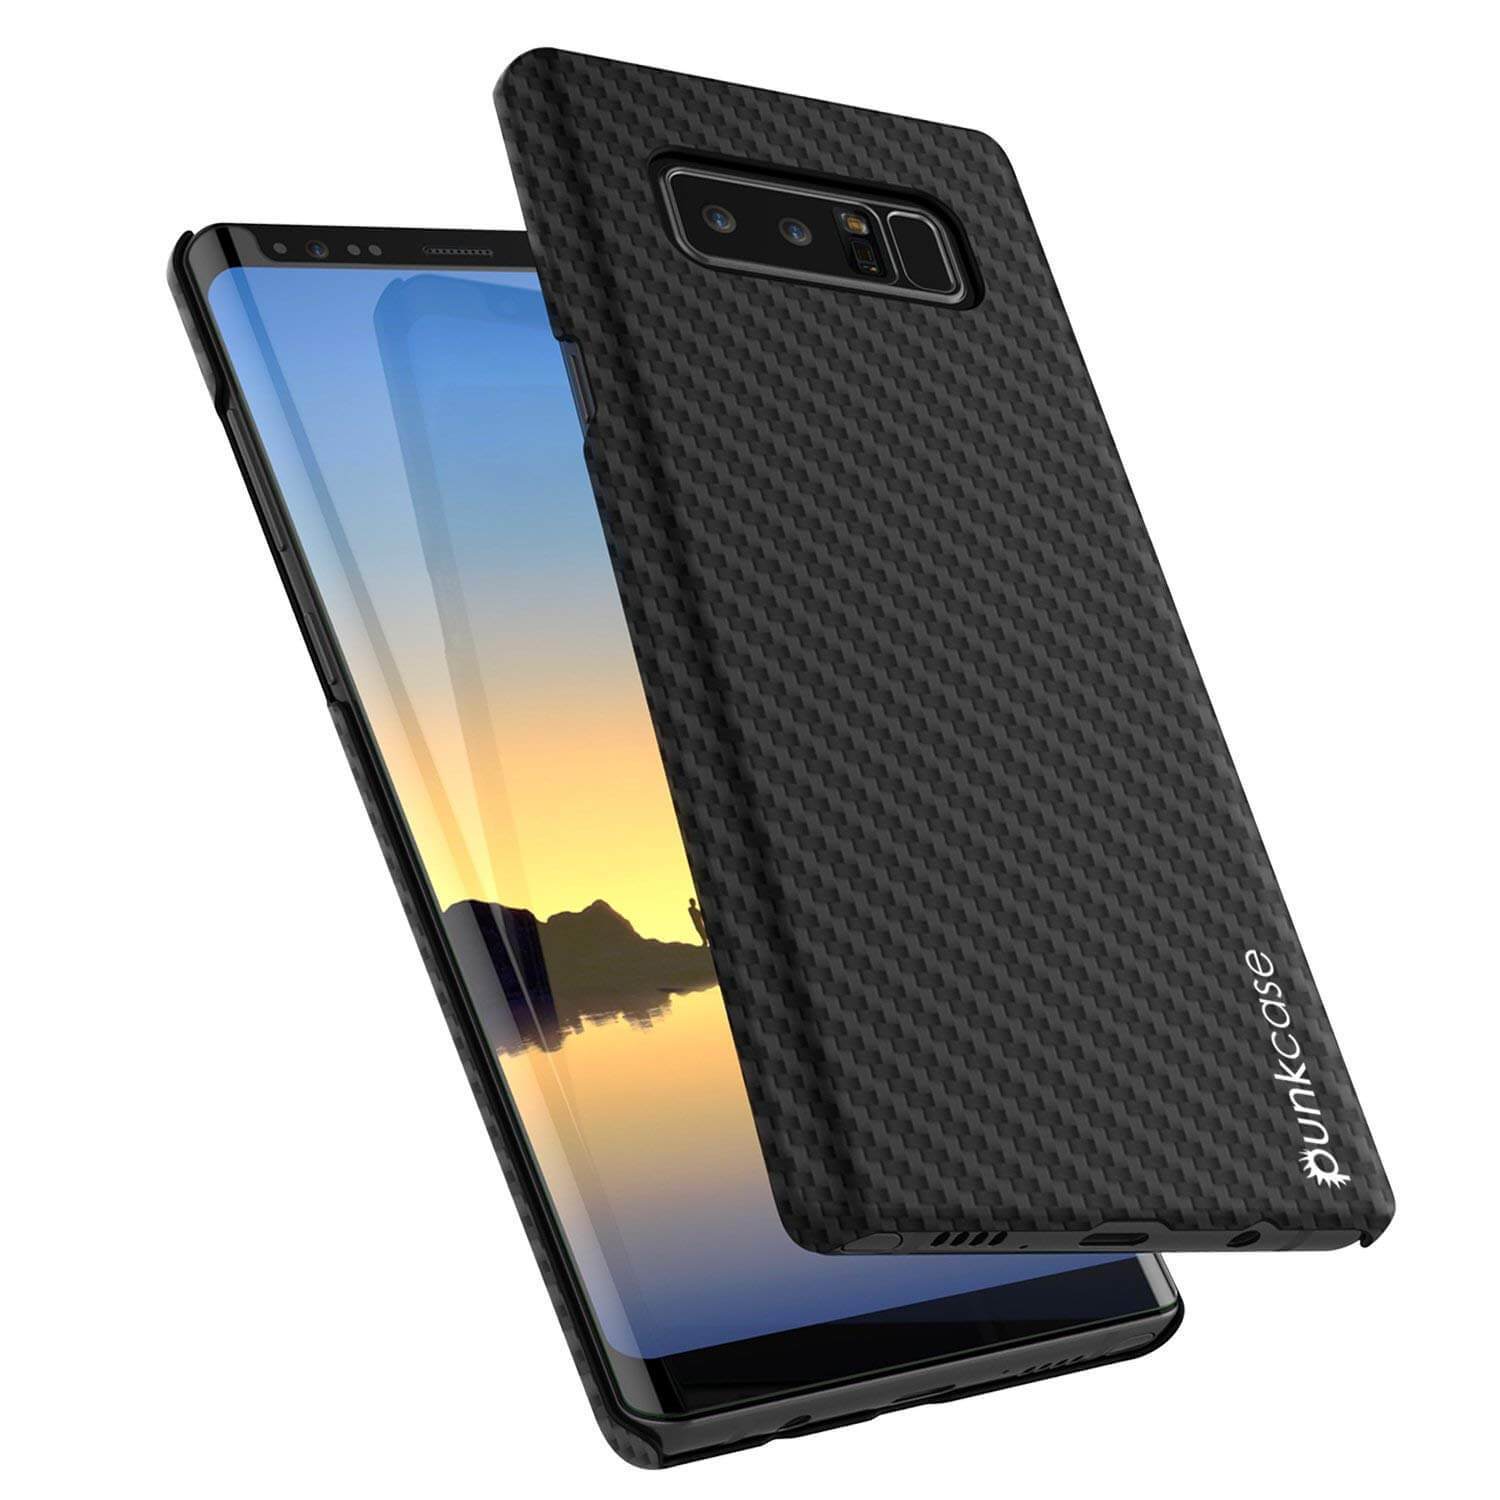 Galaxy Note 9 Case, Punkcase CarbonShield, Heavy Duty & Ultra Thin Cover